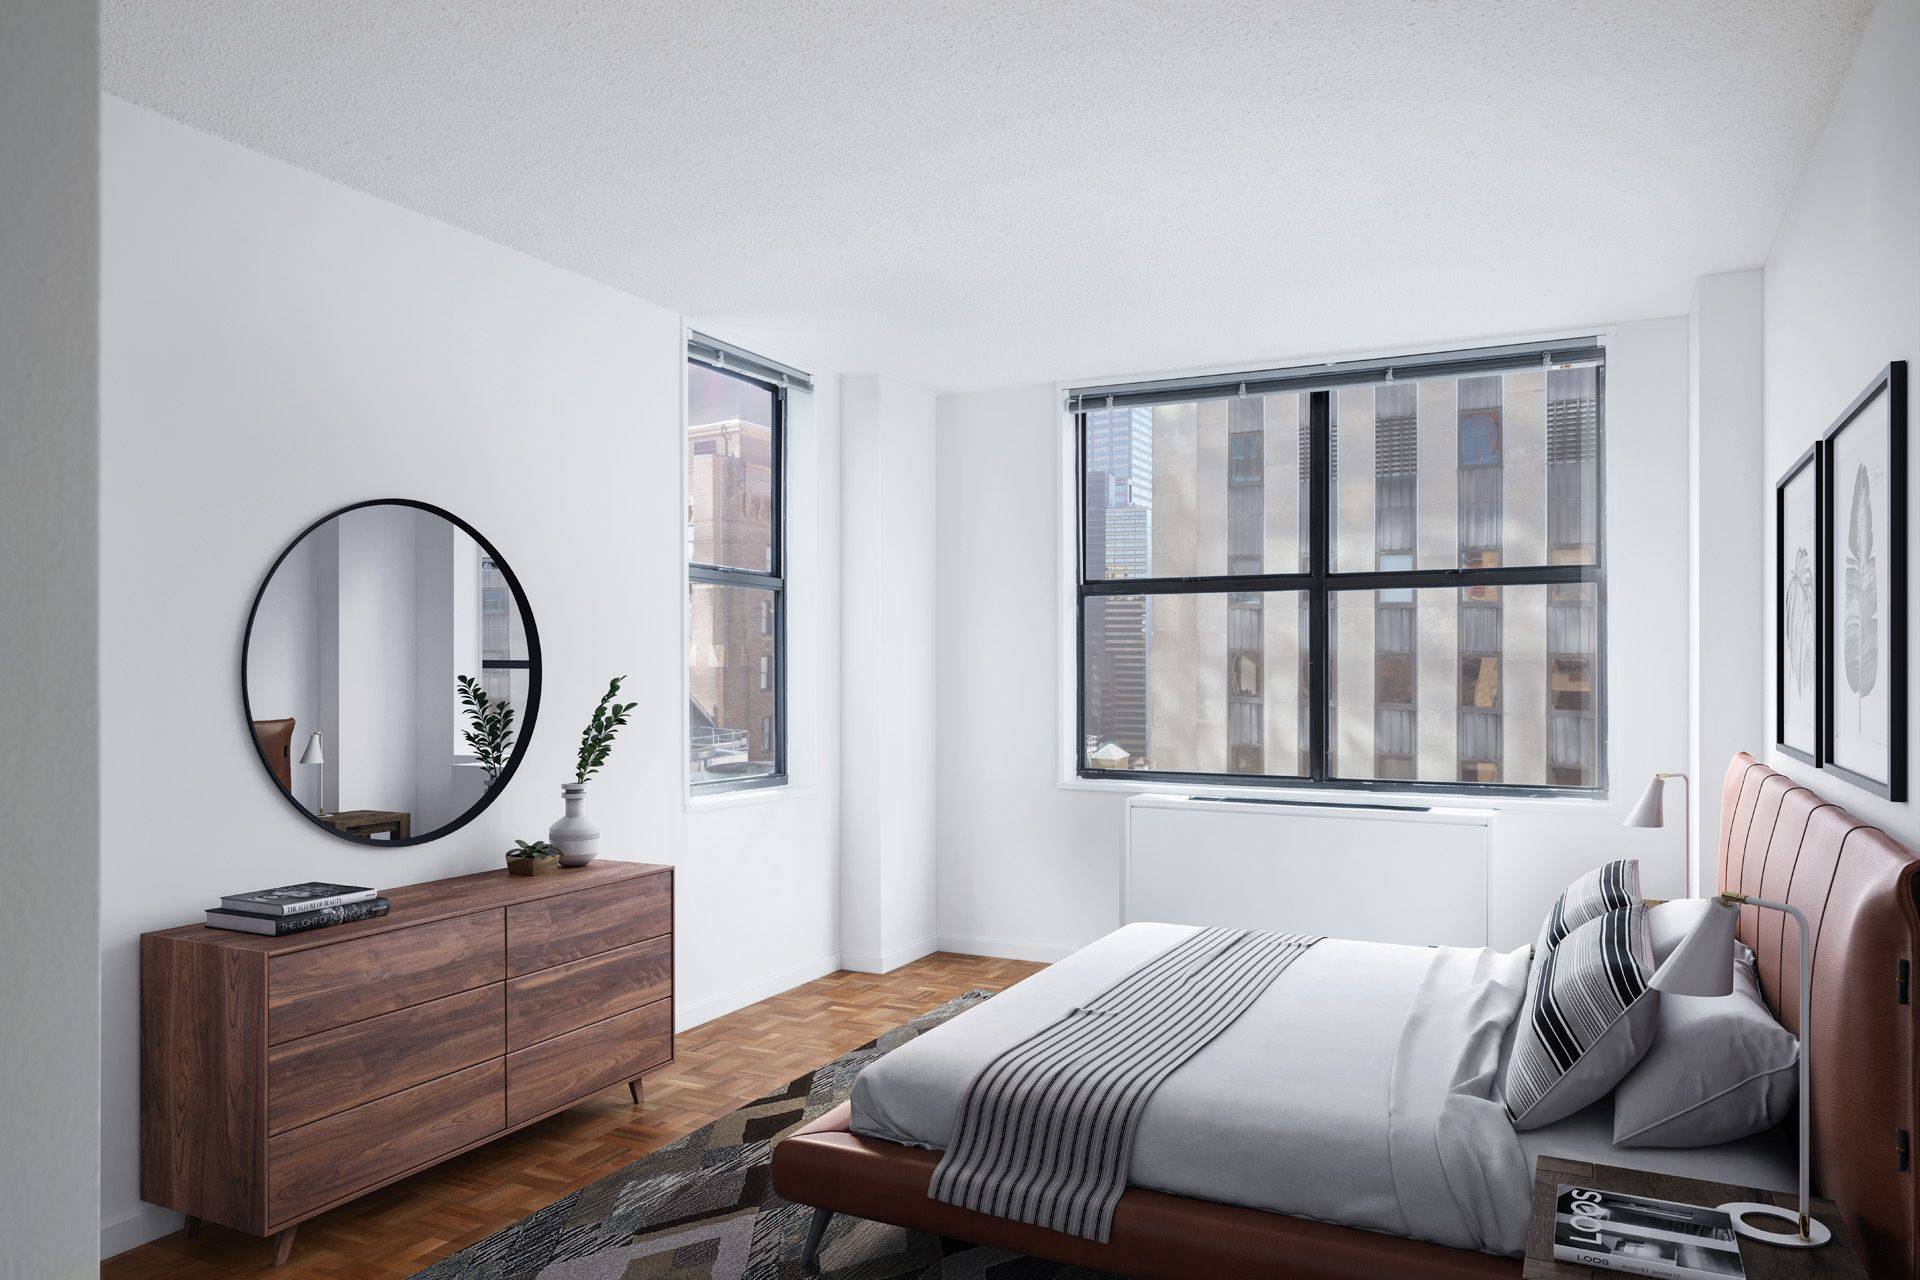 Great studio apartment with quintessential NYC views across Broadway.